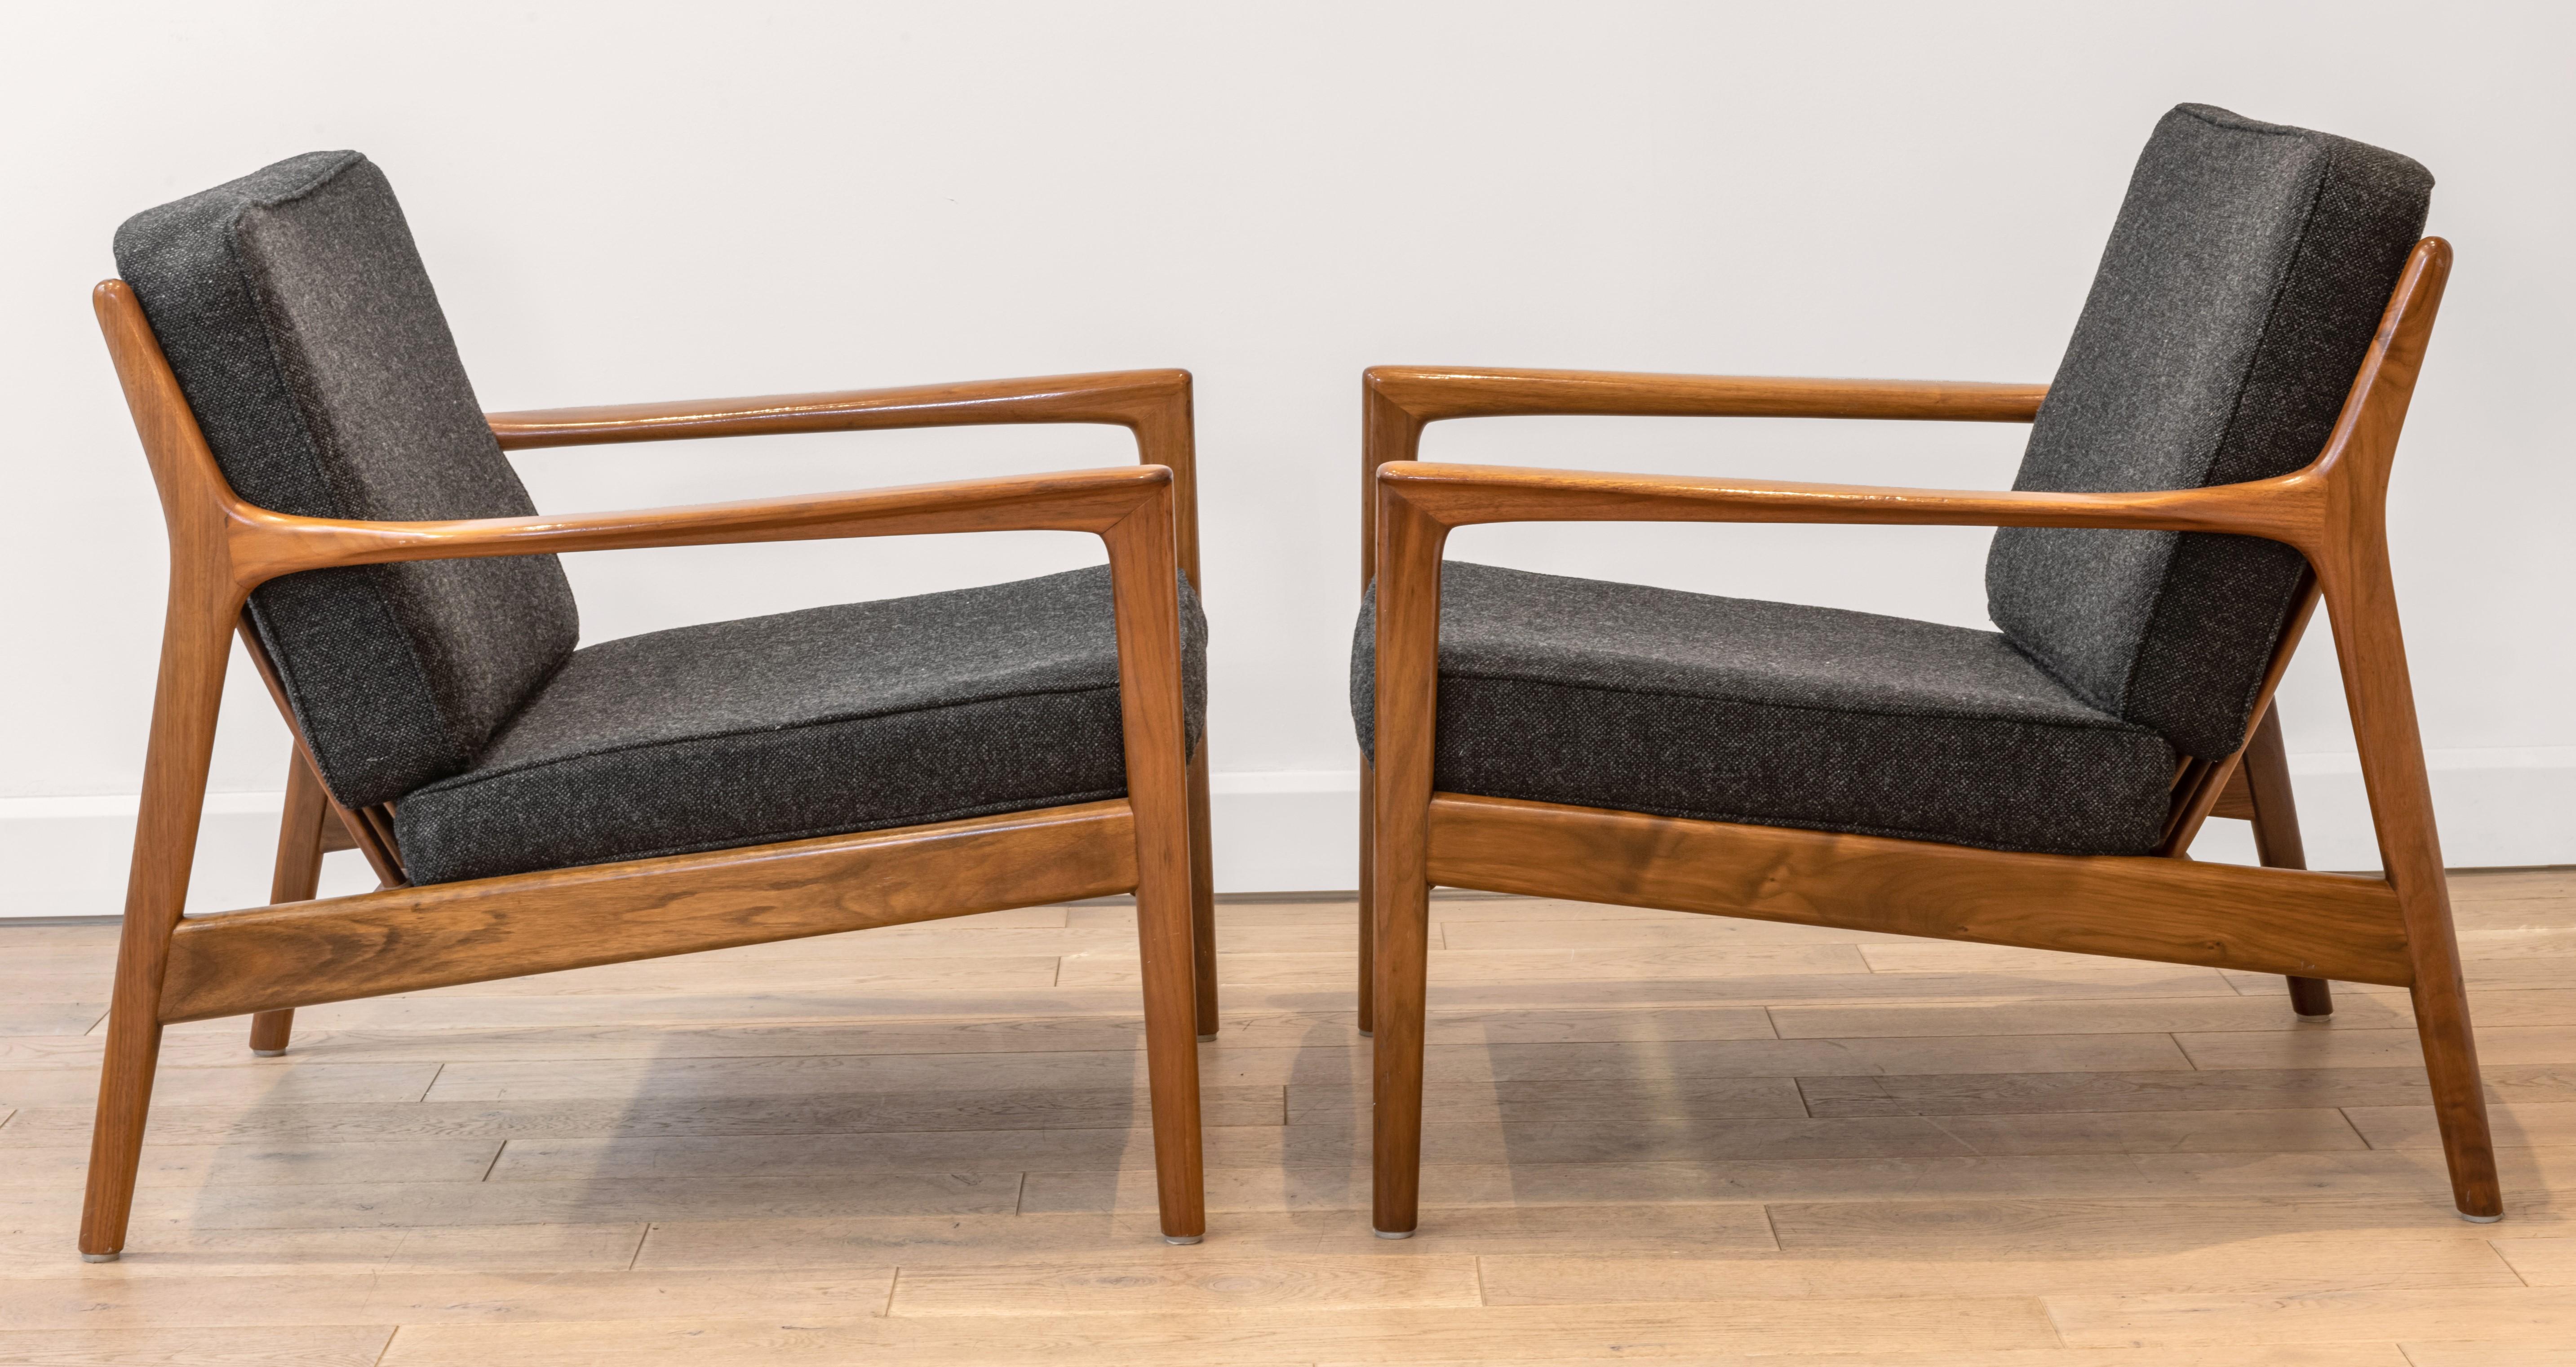 A pair of lounge chairs model USA 75 designed by Folke Ohlsson in 1956 and edited by DUX. This is the most beautiful version of USA75 in walnut with a very nice grain of wood. Folke Ohlsson was born in Sweden, in 1919. He studied at the School of